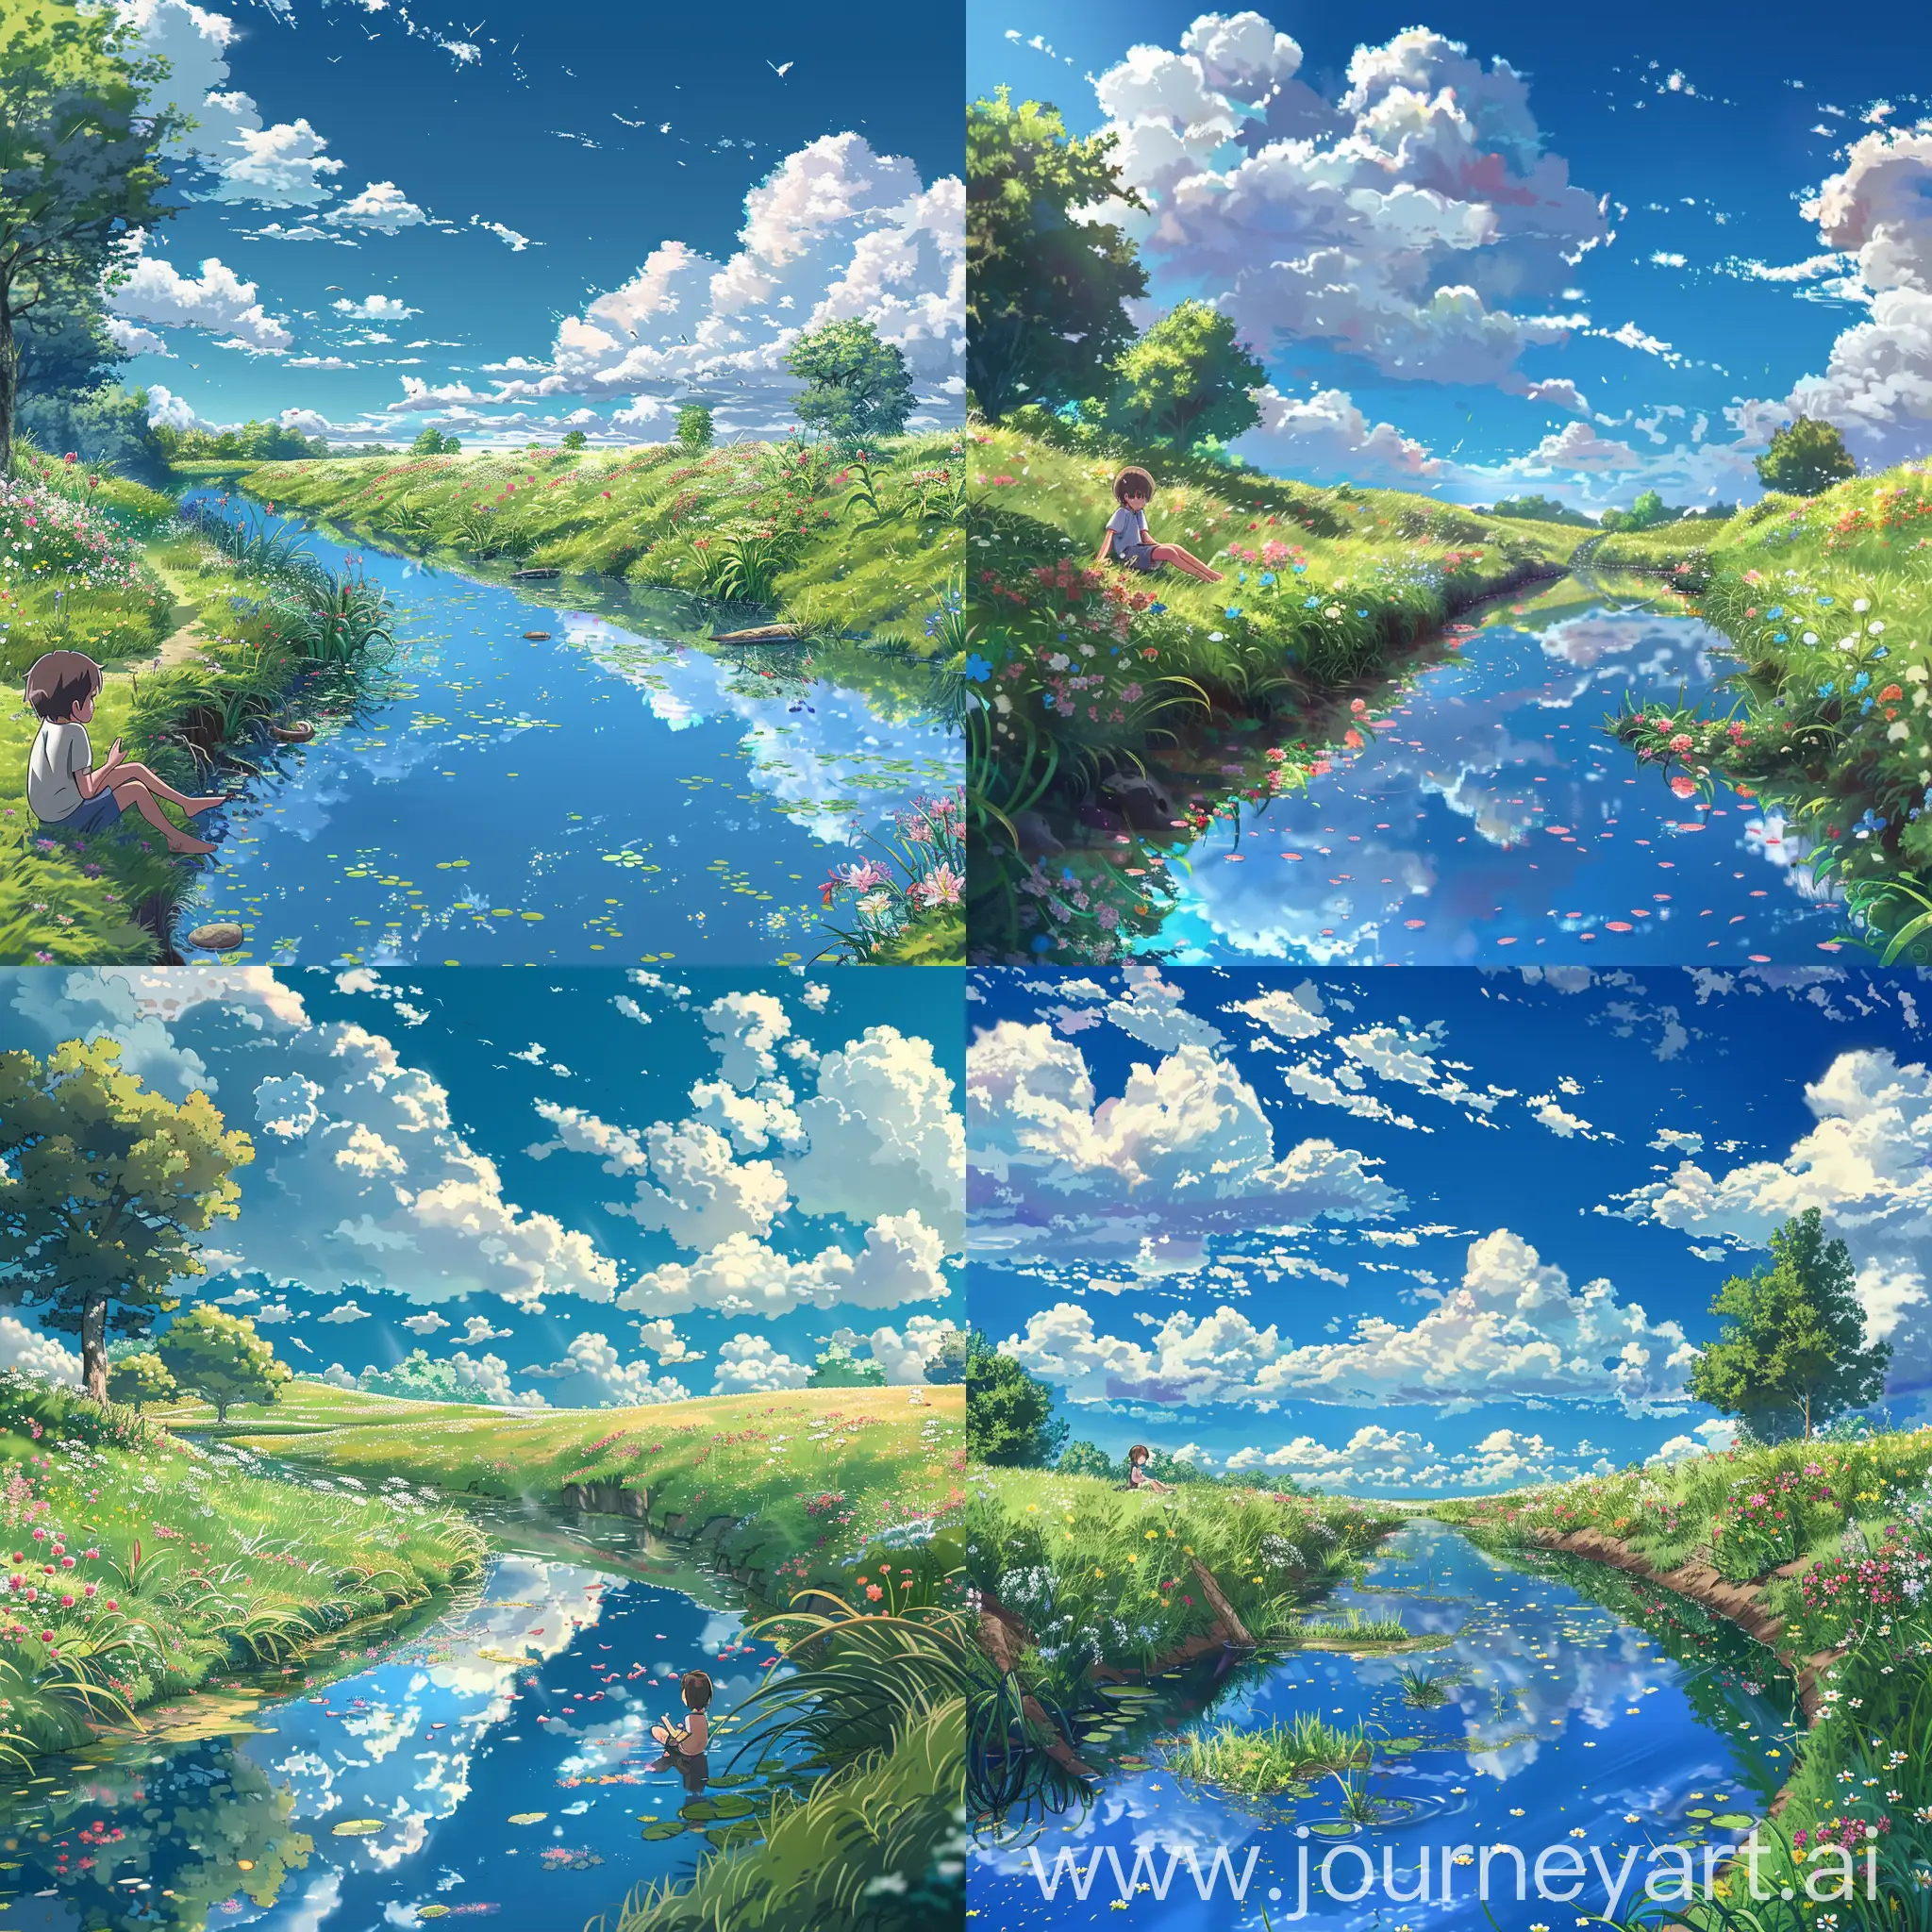 Tranquil-Summer-Afternoon-by-the-Riverside-Makoto-Shinkai-Inspired-Anime-Scenery-with-Blossoms-and-a-Reflective-Stream